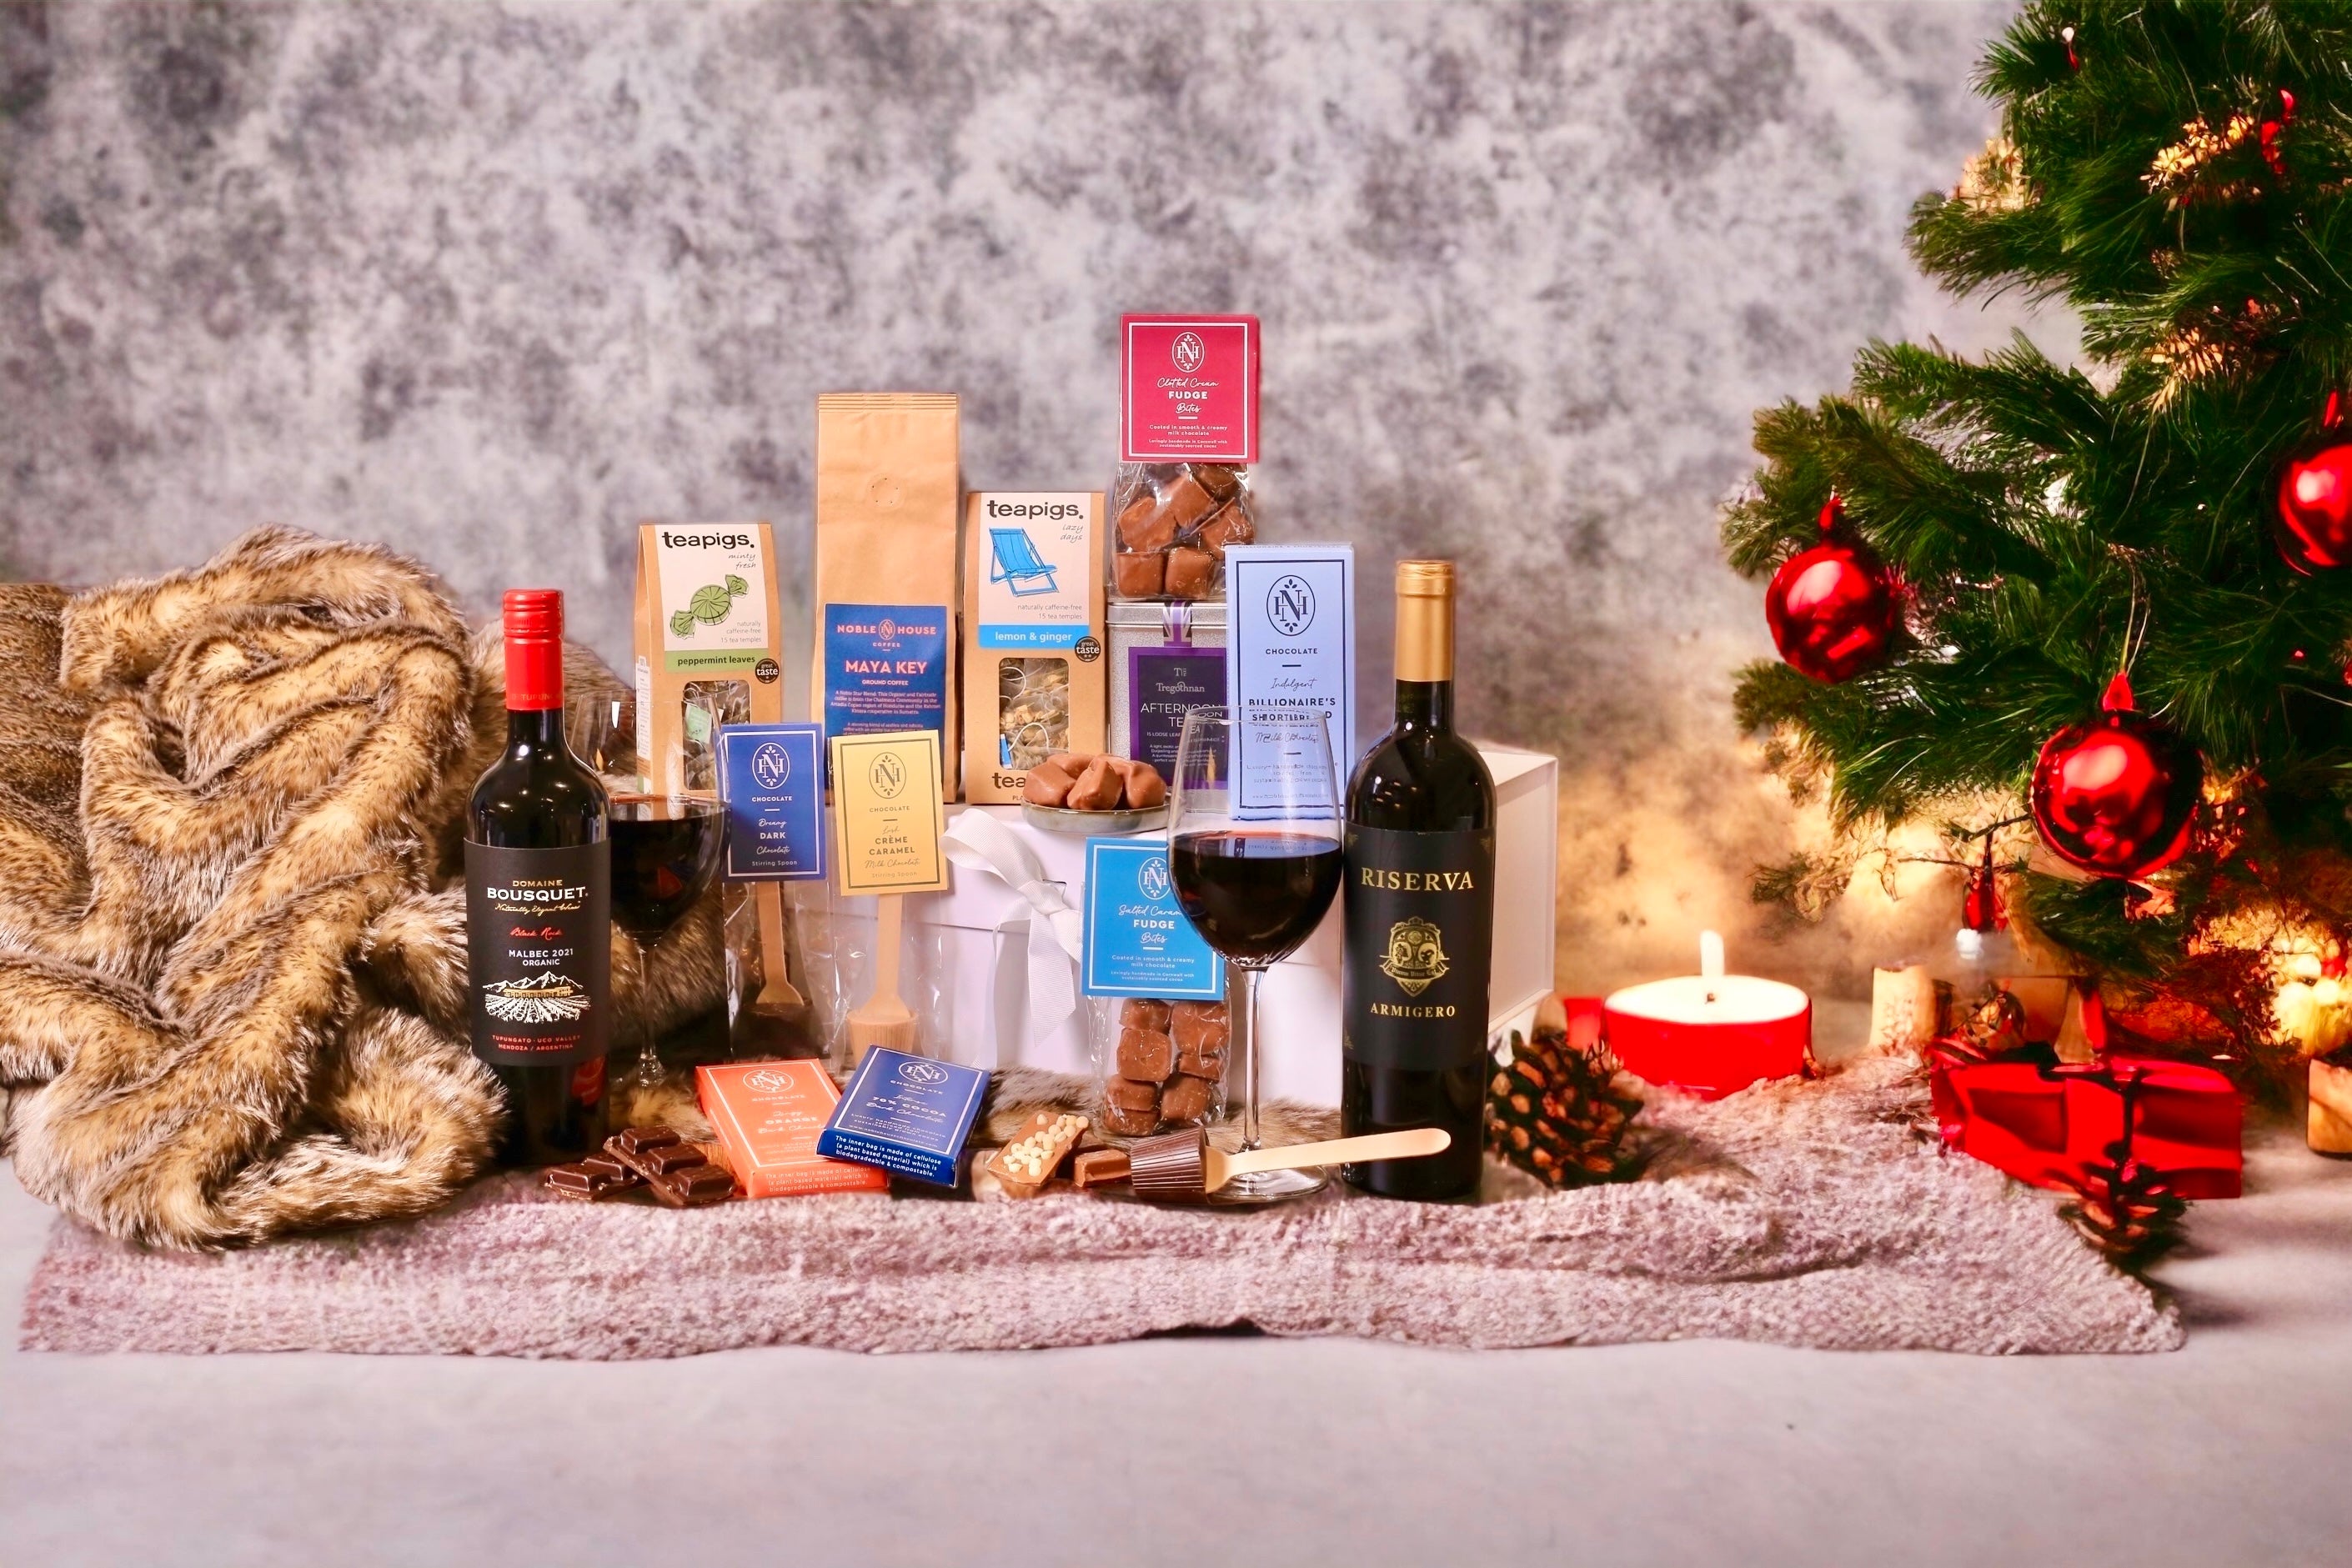 Product Focus: A Cozy Night in with The Hygge Time Gift Hamper